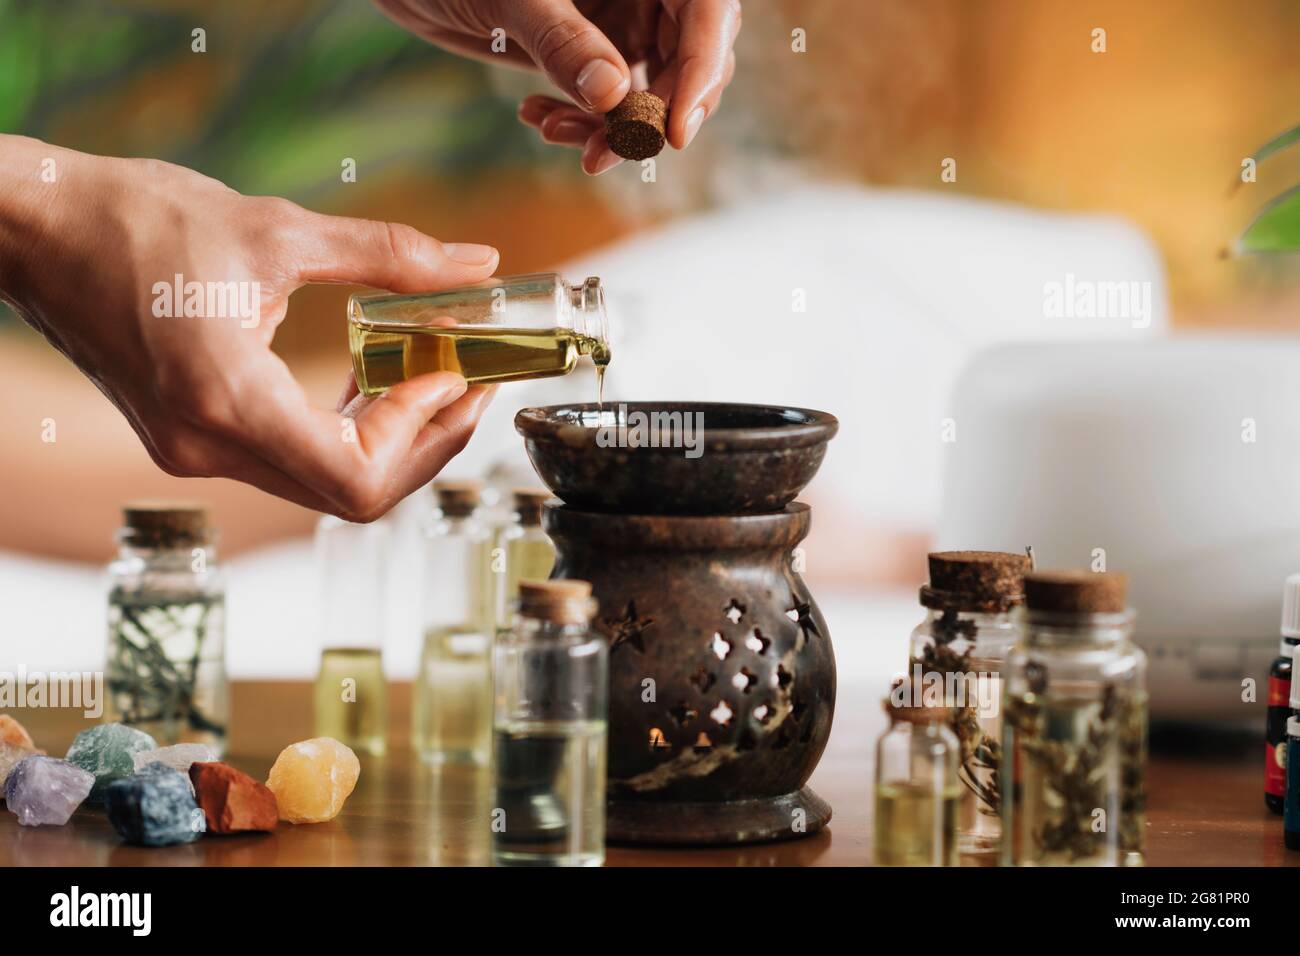 Ayurveda aromatherapy with essential oil diffuser Stock Photo - Alamy